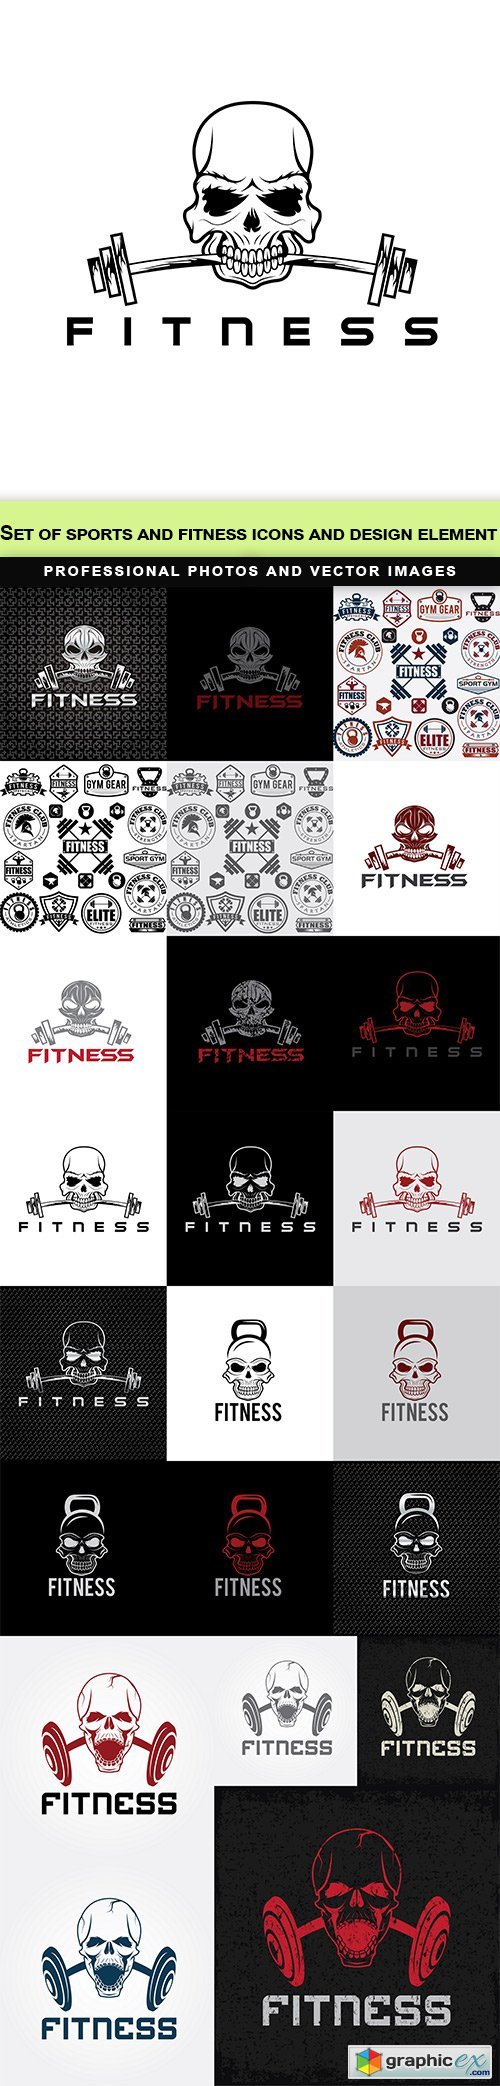 Set of sports and fitness icons and design element - 23 EPS